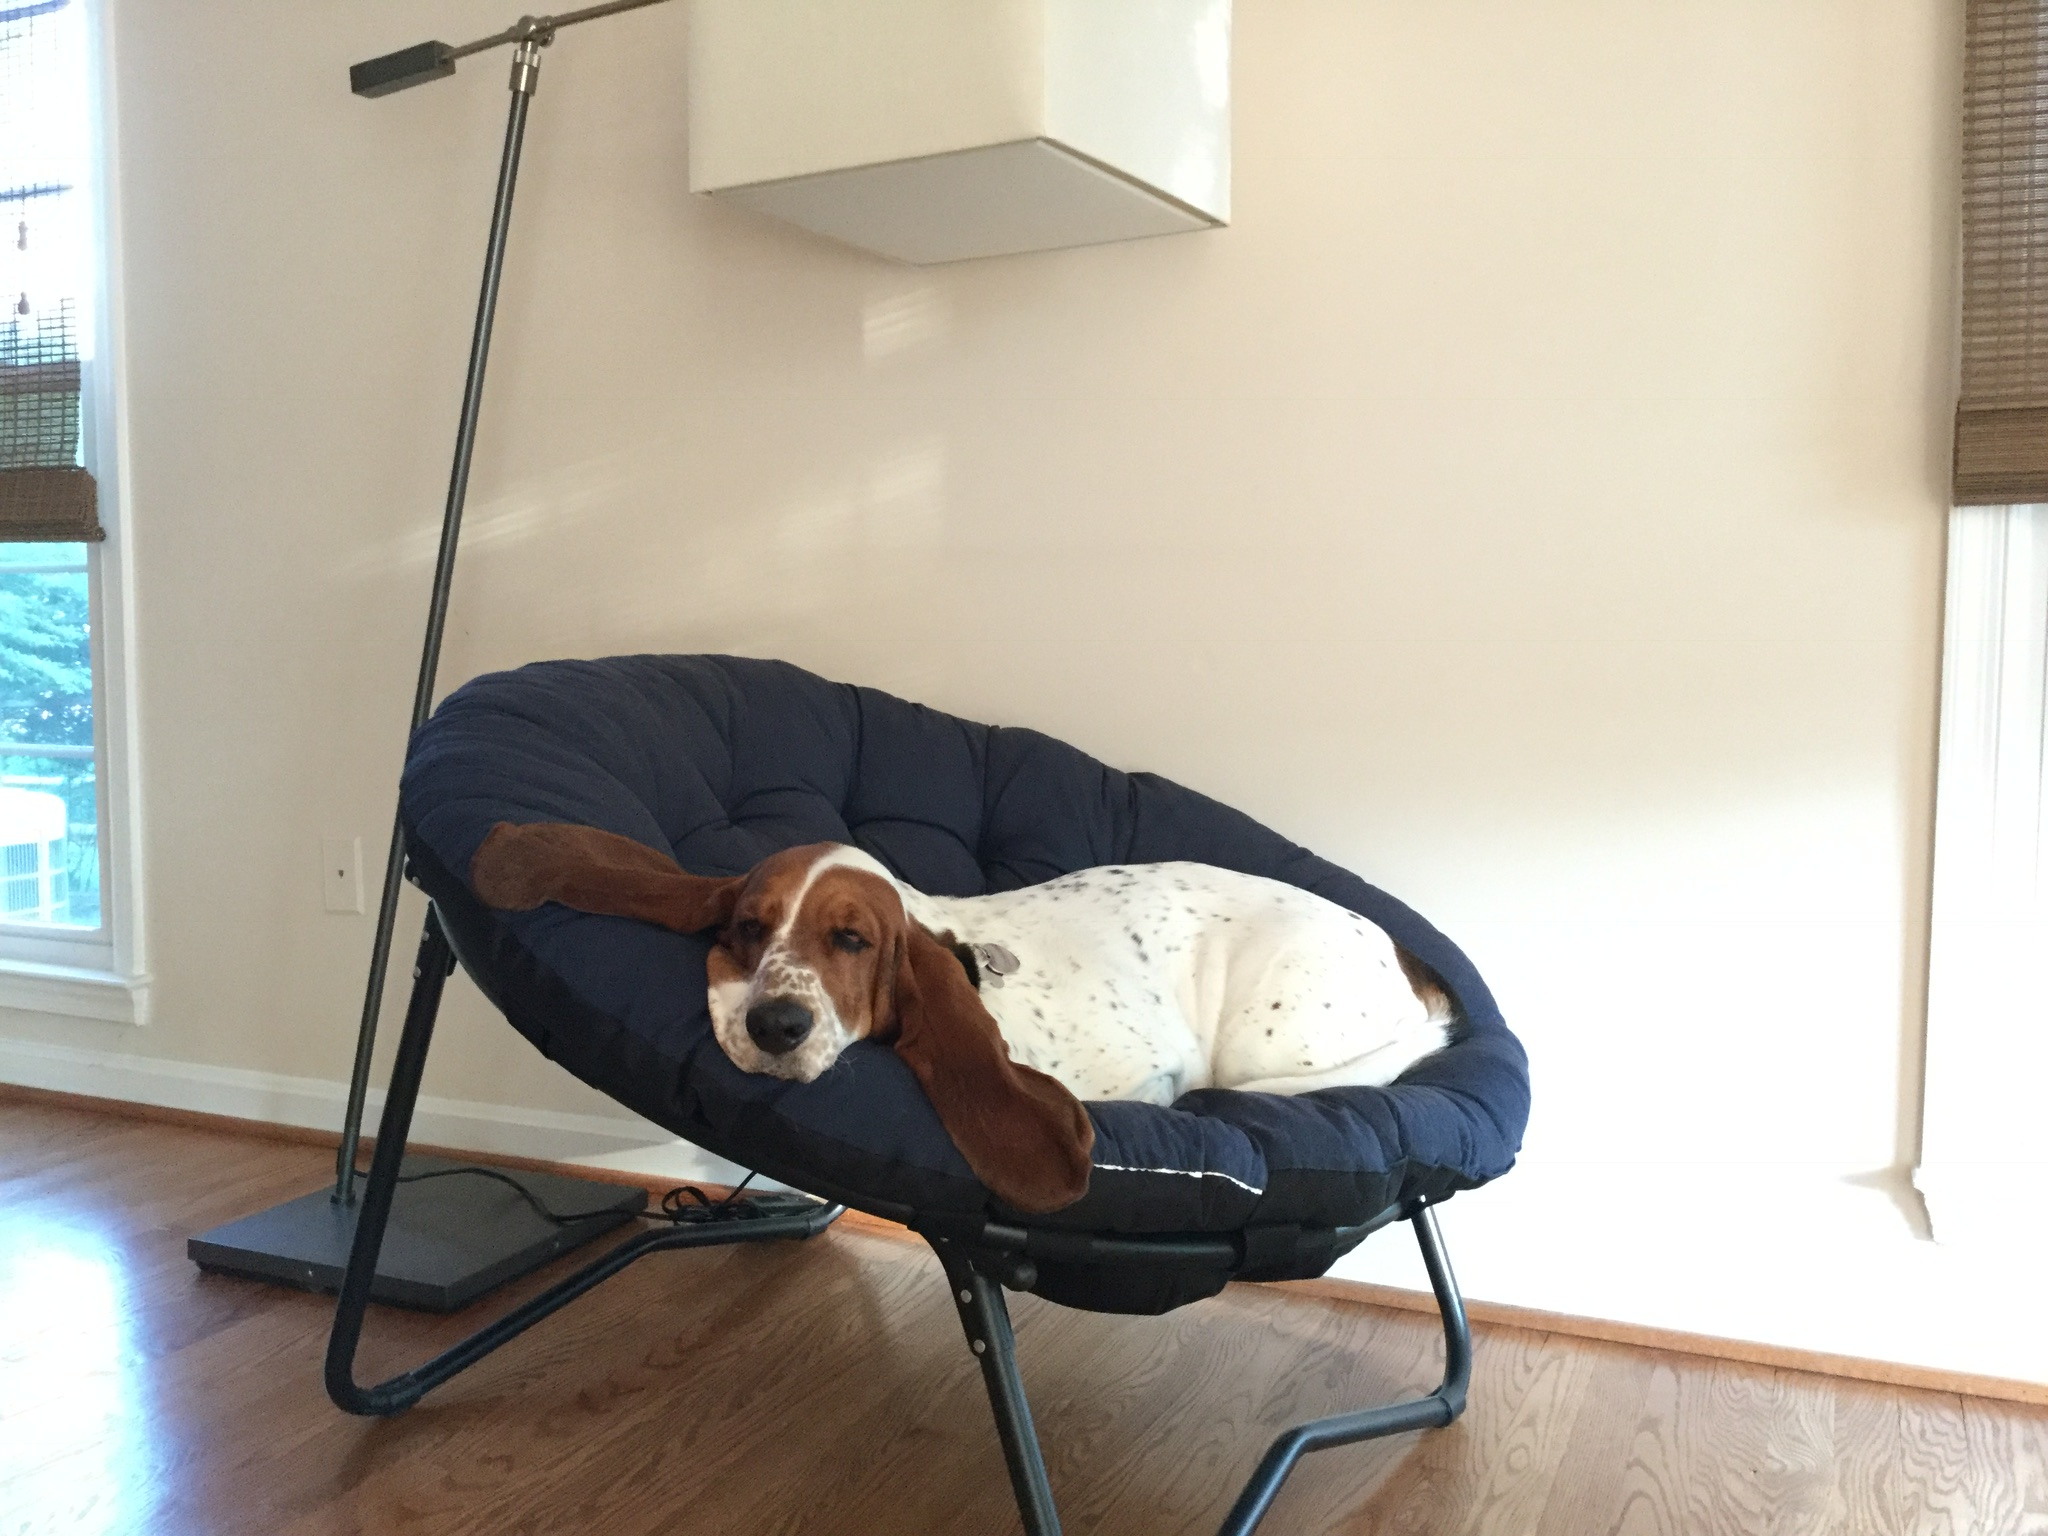 Basset Hound dog resting on an aesthetic chair